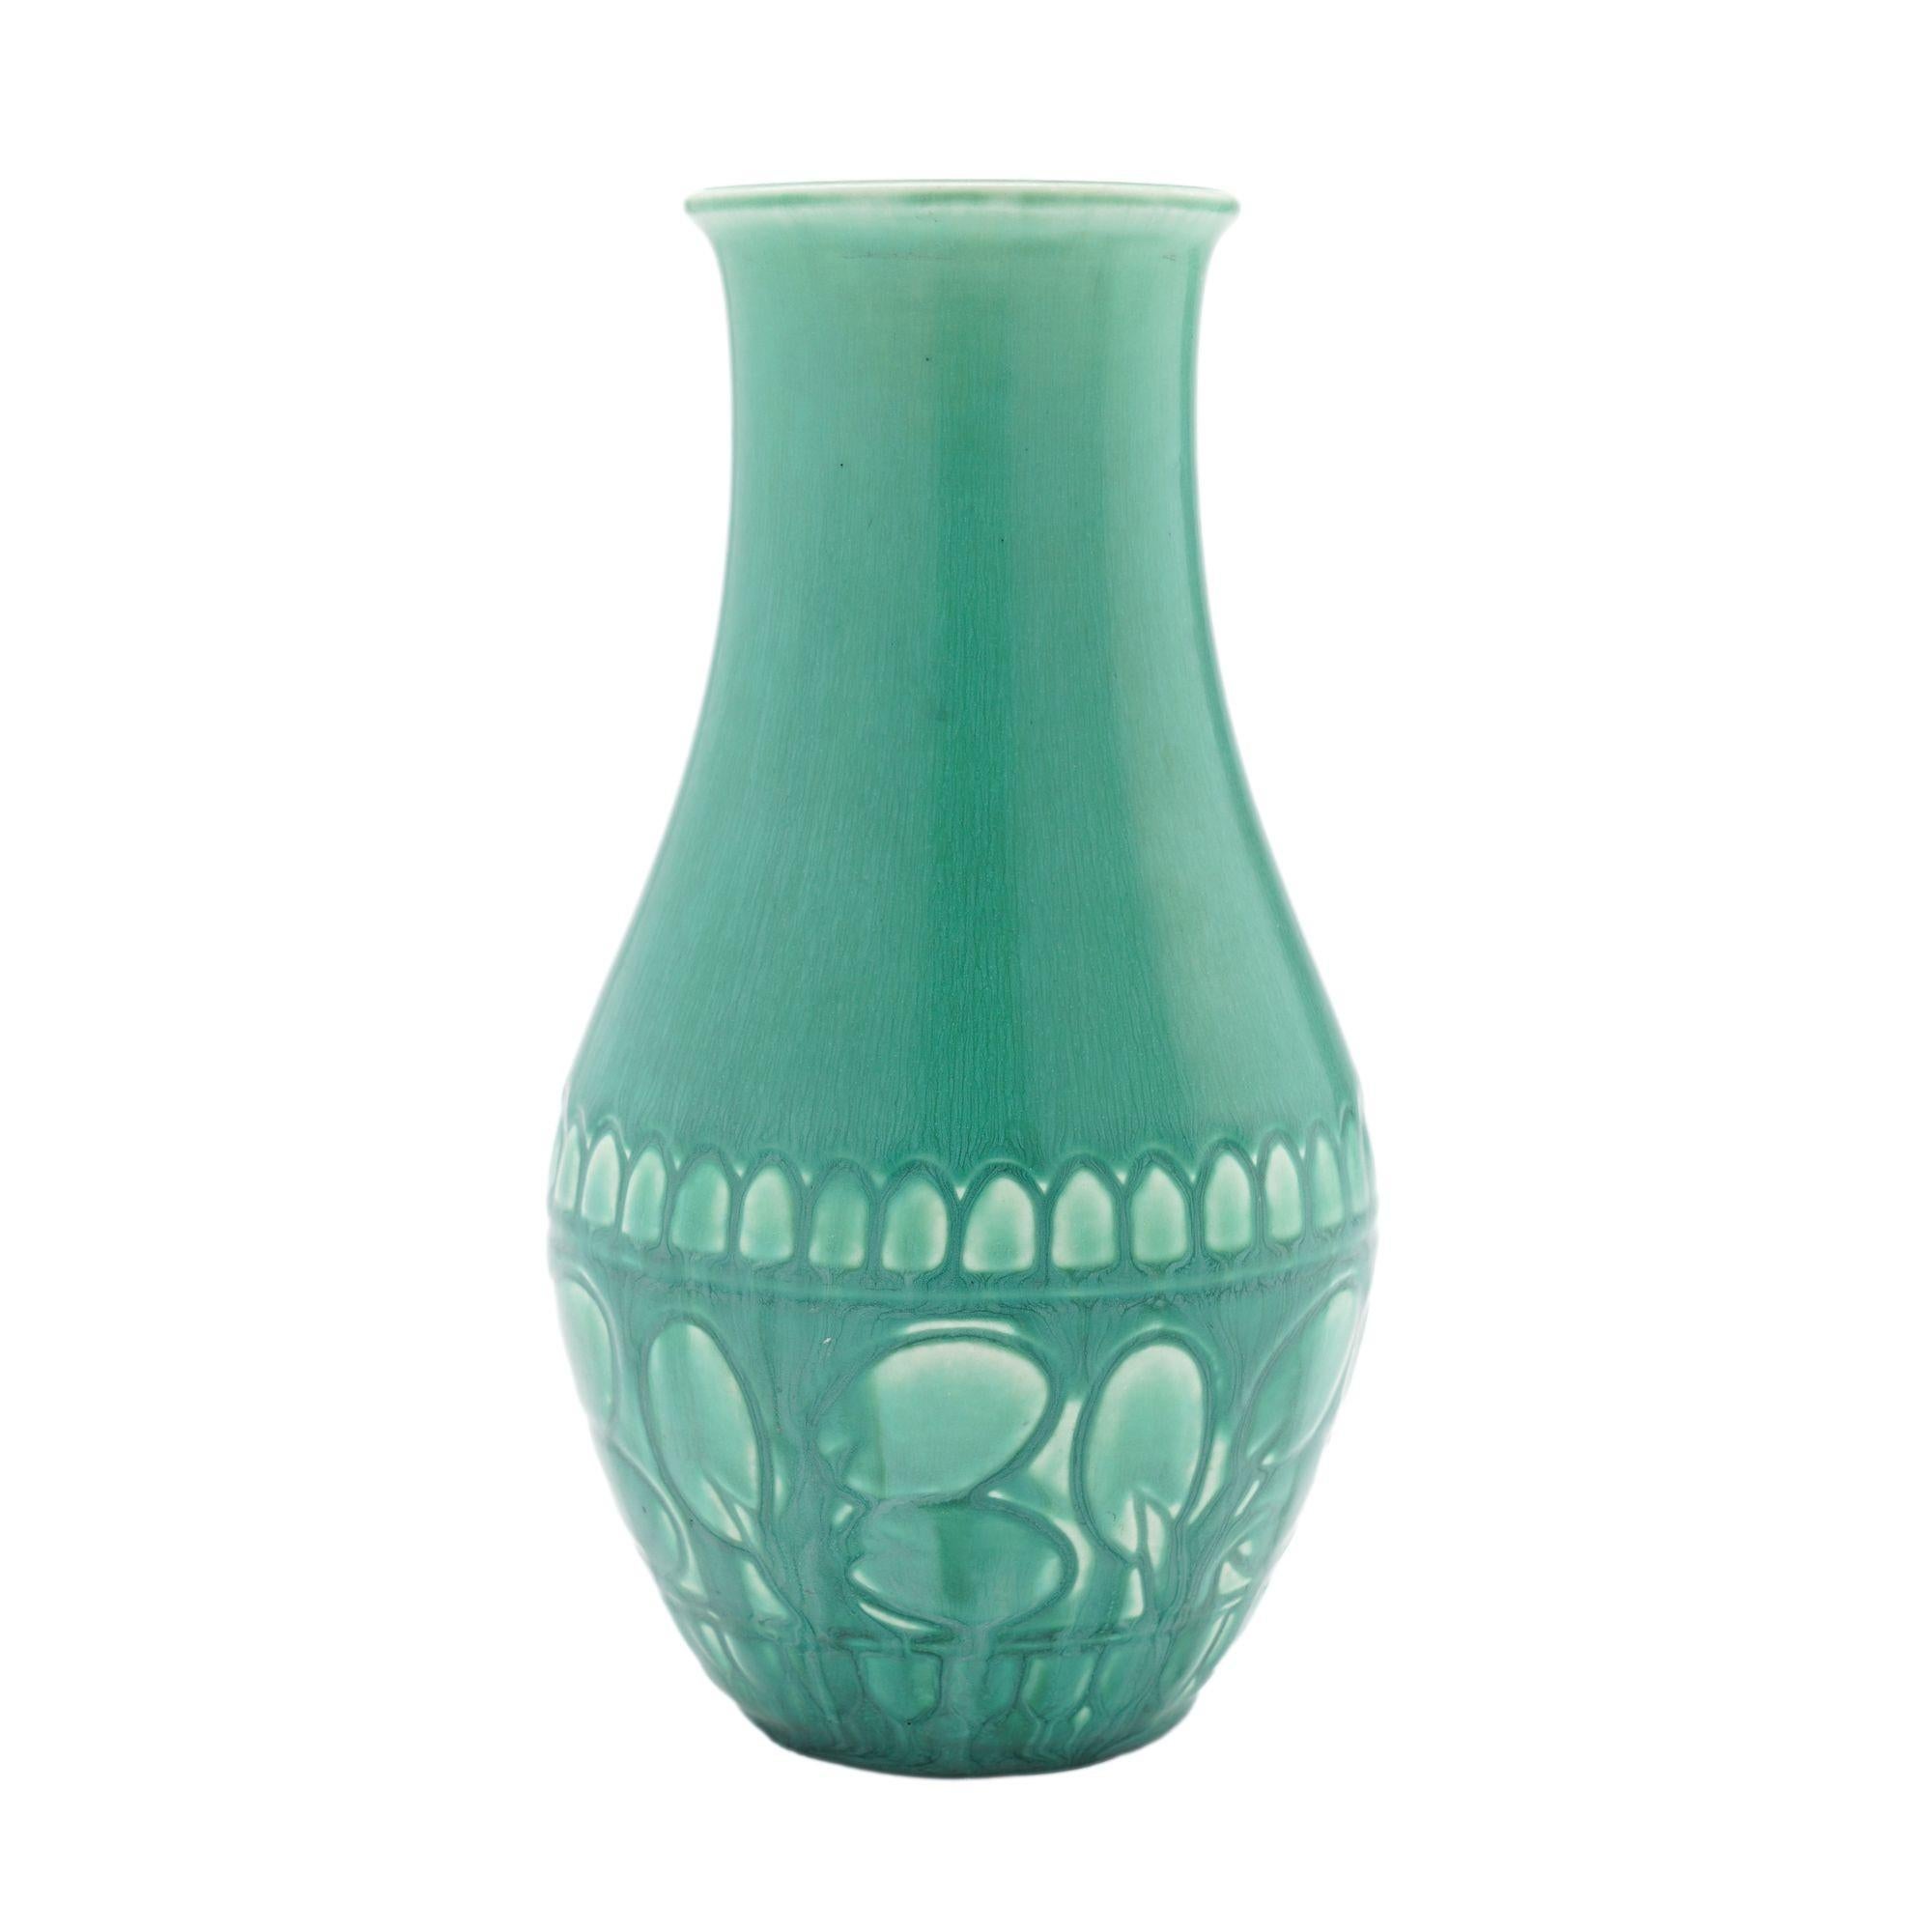 Tapered bulb form vase finished in a medium green drip vellum glaze over a shallow impressed design on the lower half of the vase. The vase has a 2-1/2